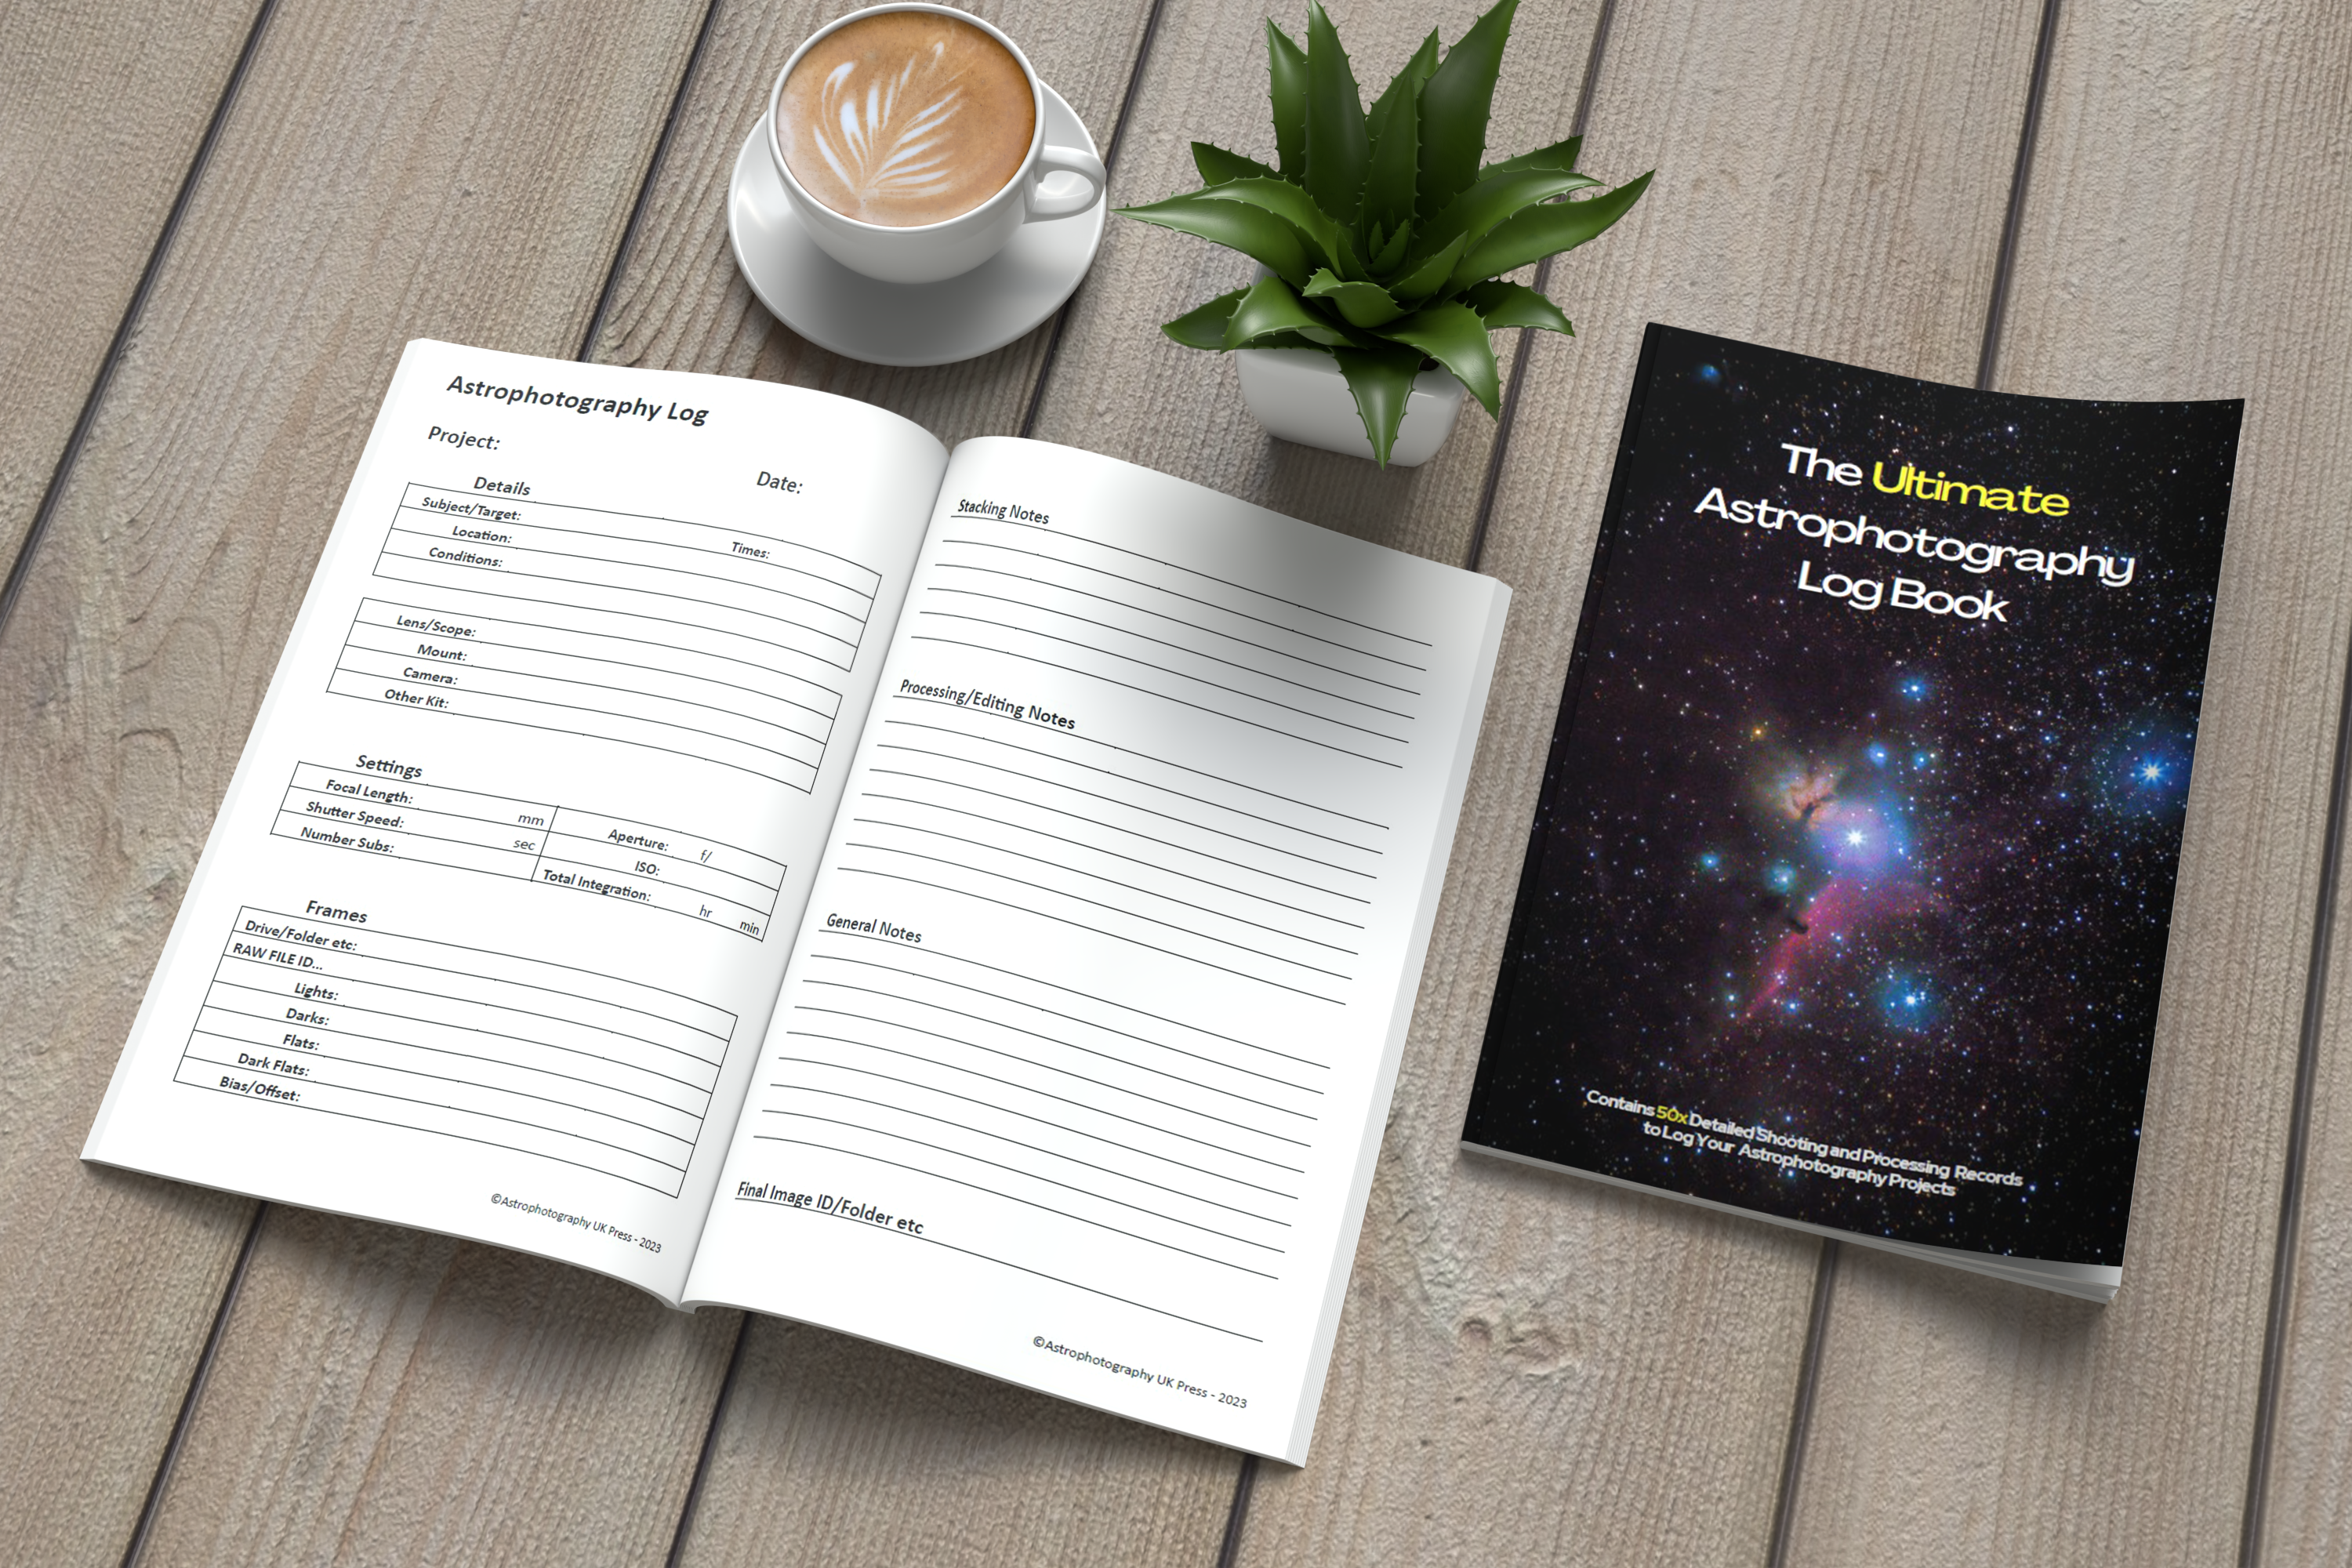 An image depicting The Ultimate Astrophotography Logbook cover with another copy open on a table, with a small potted plant and a coffeee cup